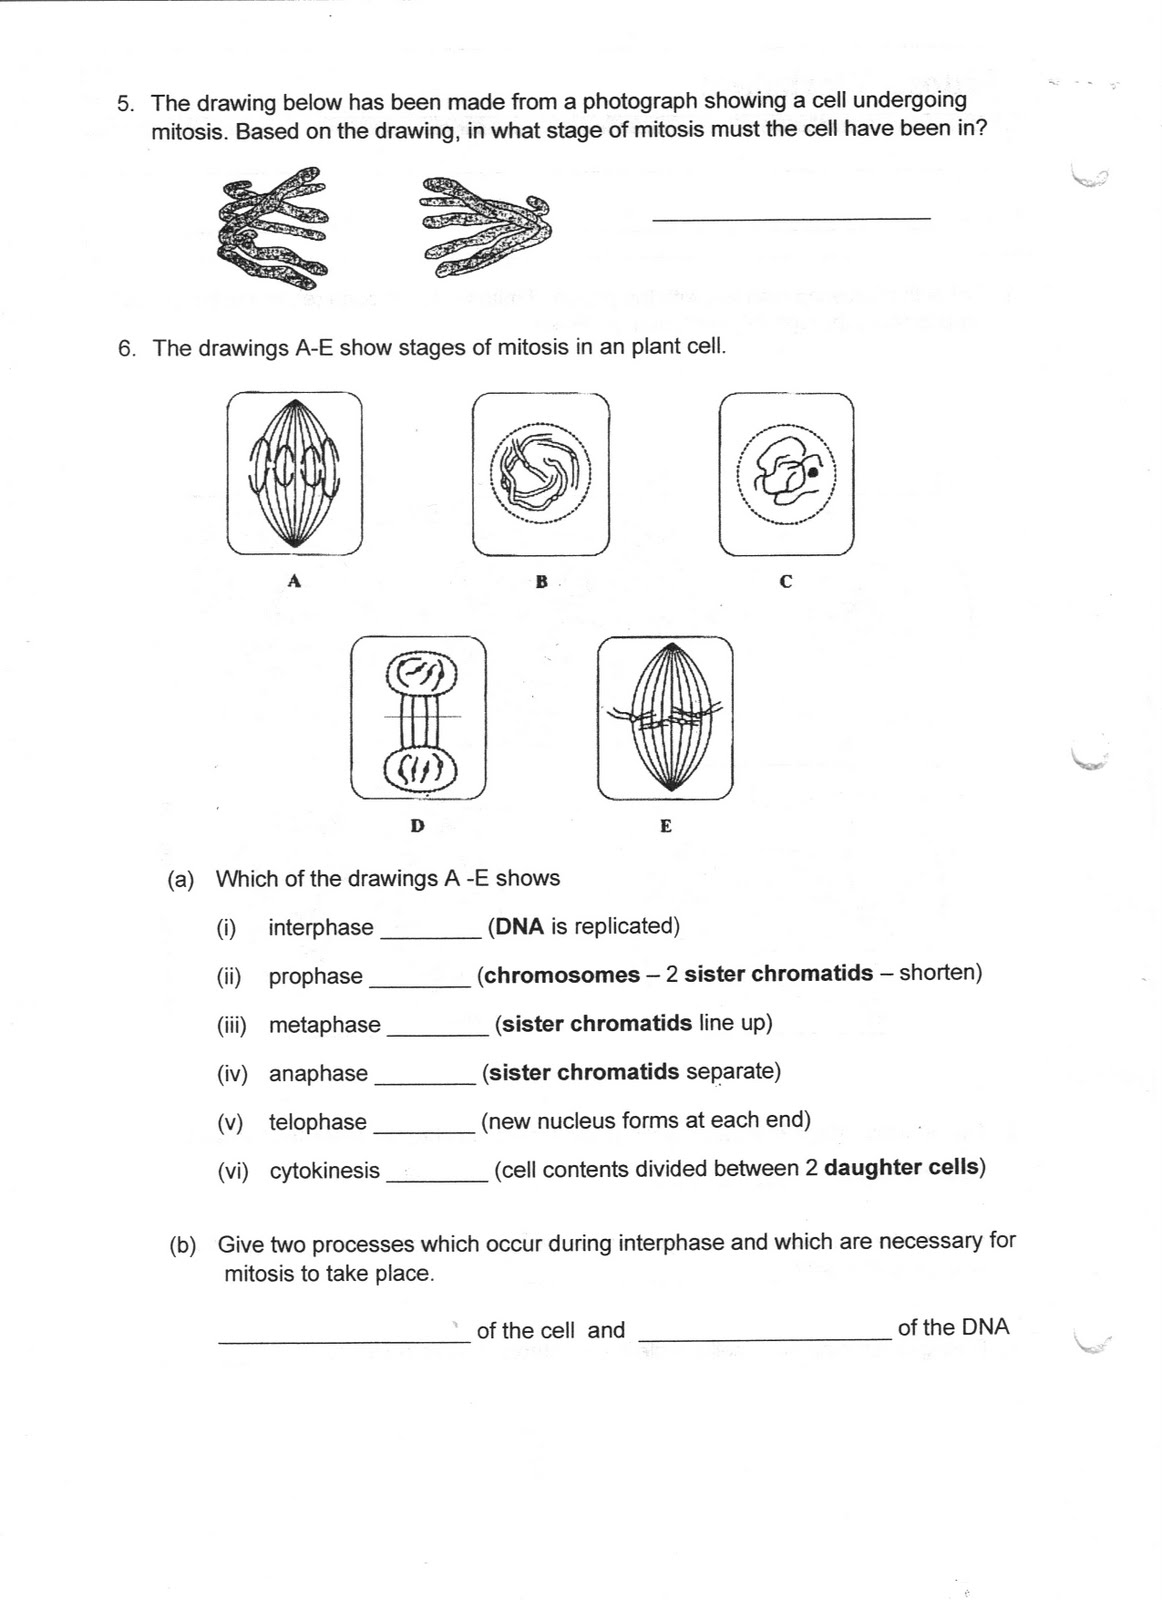 16 Best Images of Steps Of Meiosis Worksheet Answers - Meiosis Stages